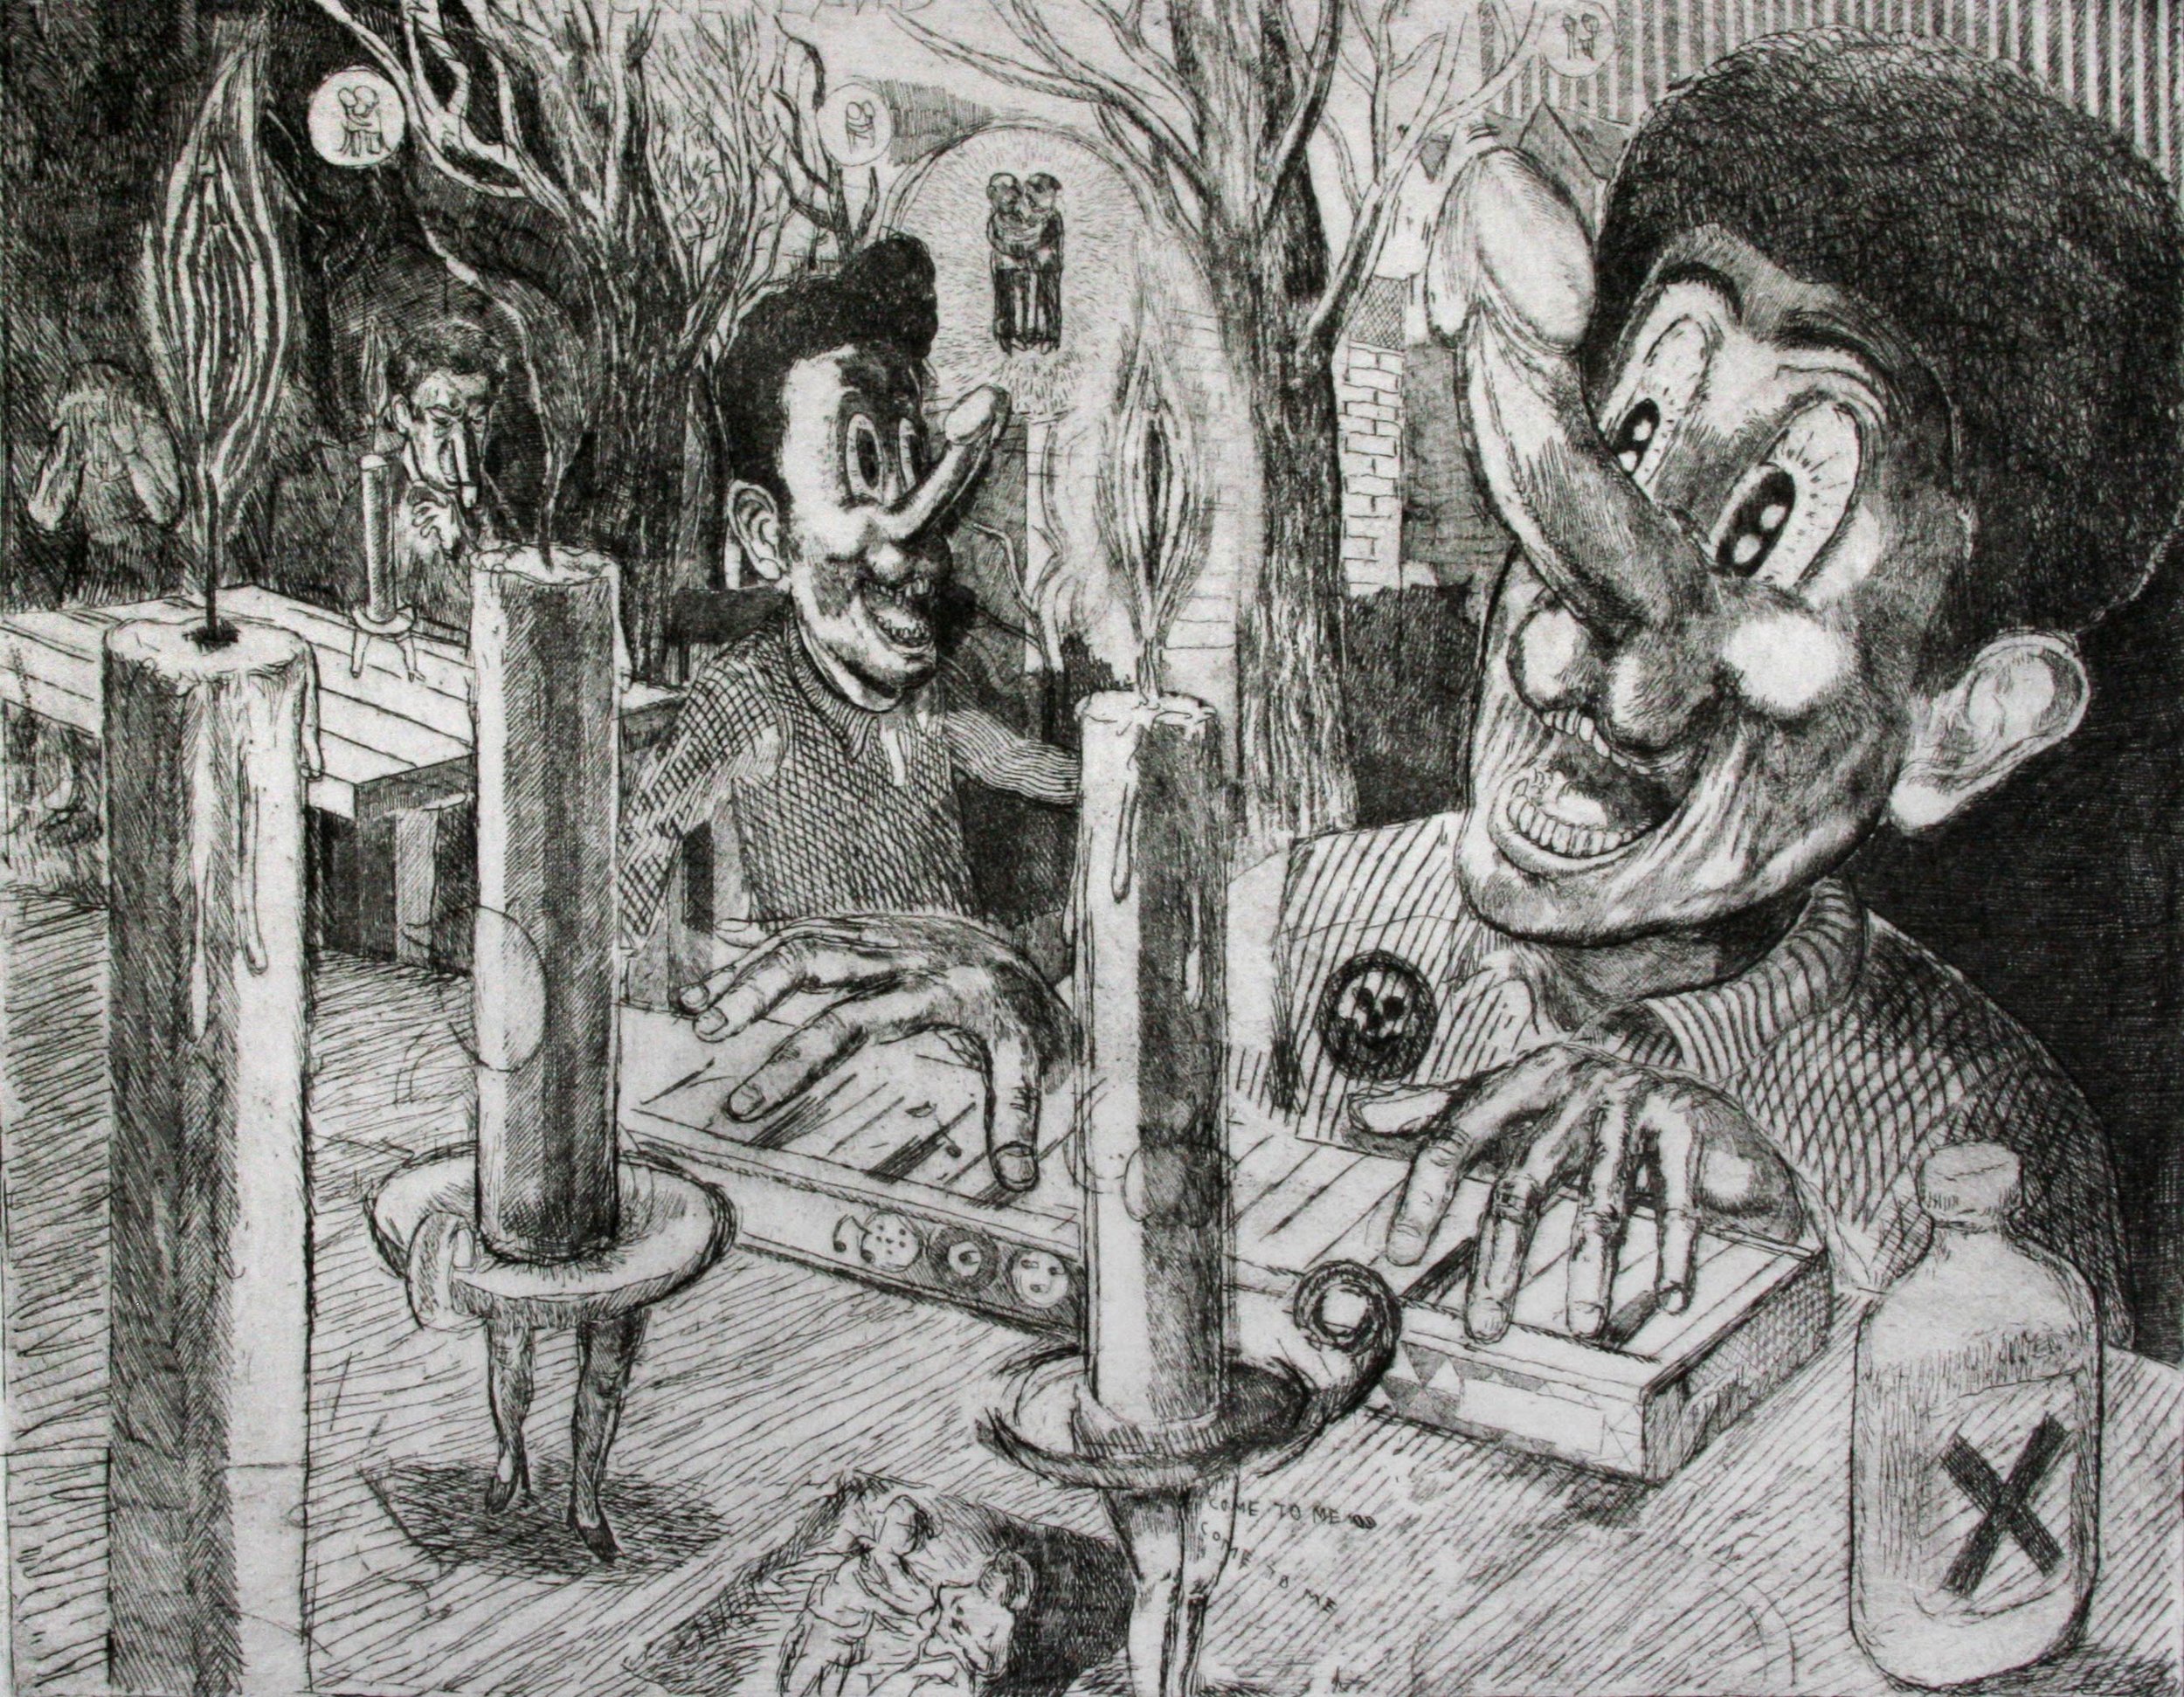    "Mr Dicky and the Candle Ladies" 2012   Engraving and etching on paper. 29 x 39 cm 